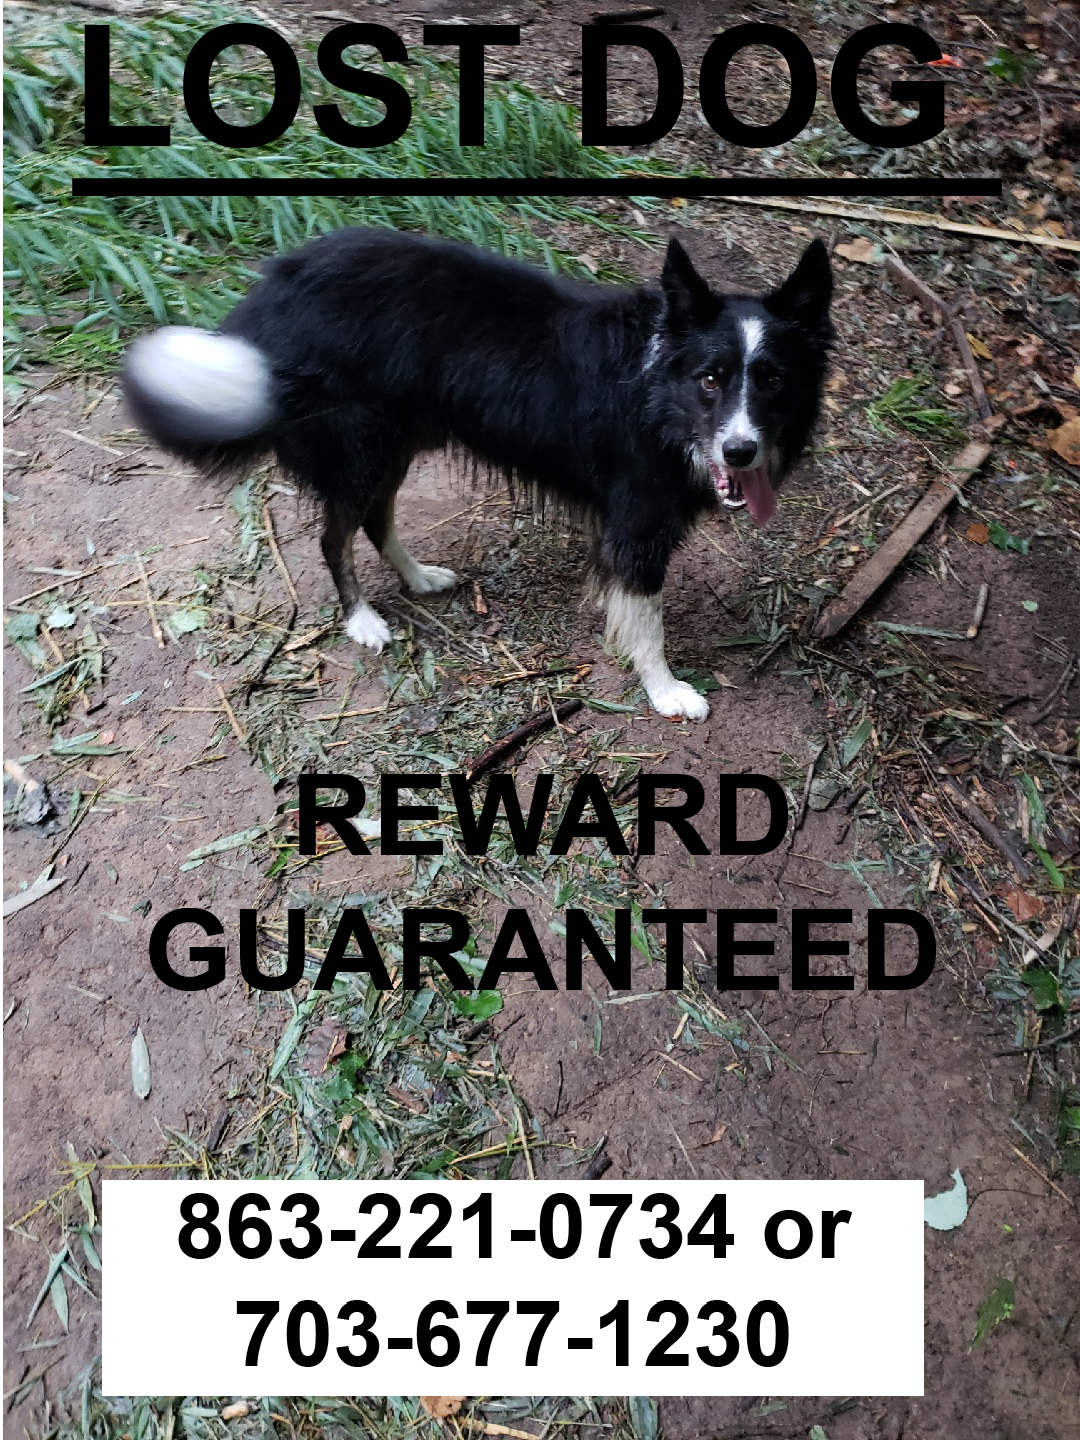 Image of Archer, Lost Dog